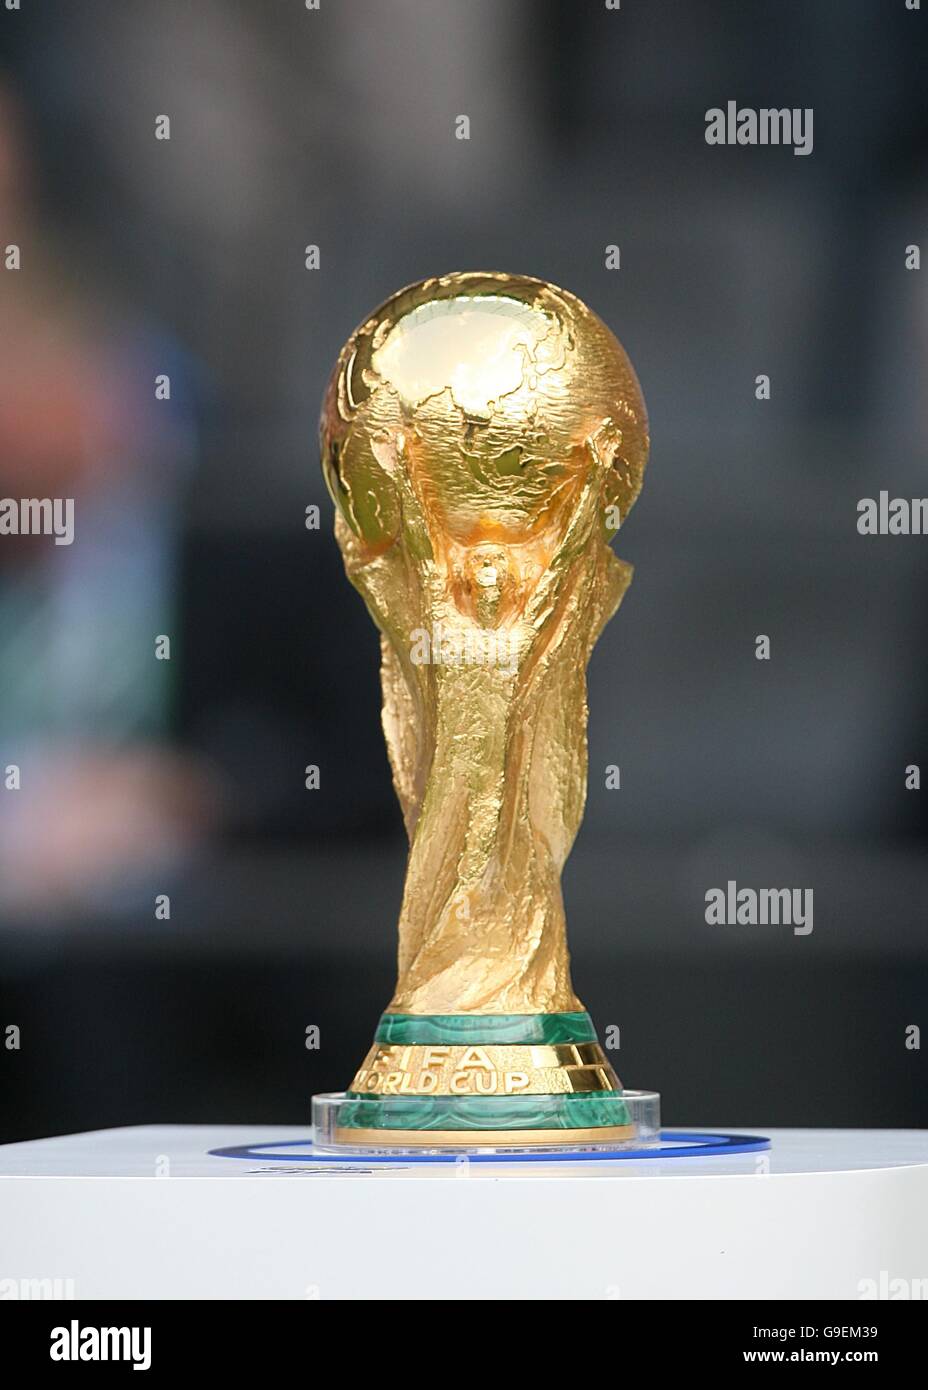 Soccer - 2006 FIFA World Cup Germany - Final - Italy v France - Olympiastadion - Berlin. The World Cup Trophy Stock Photo